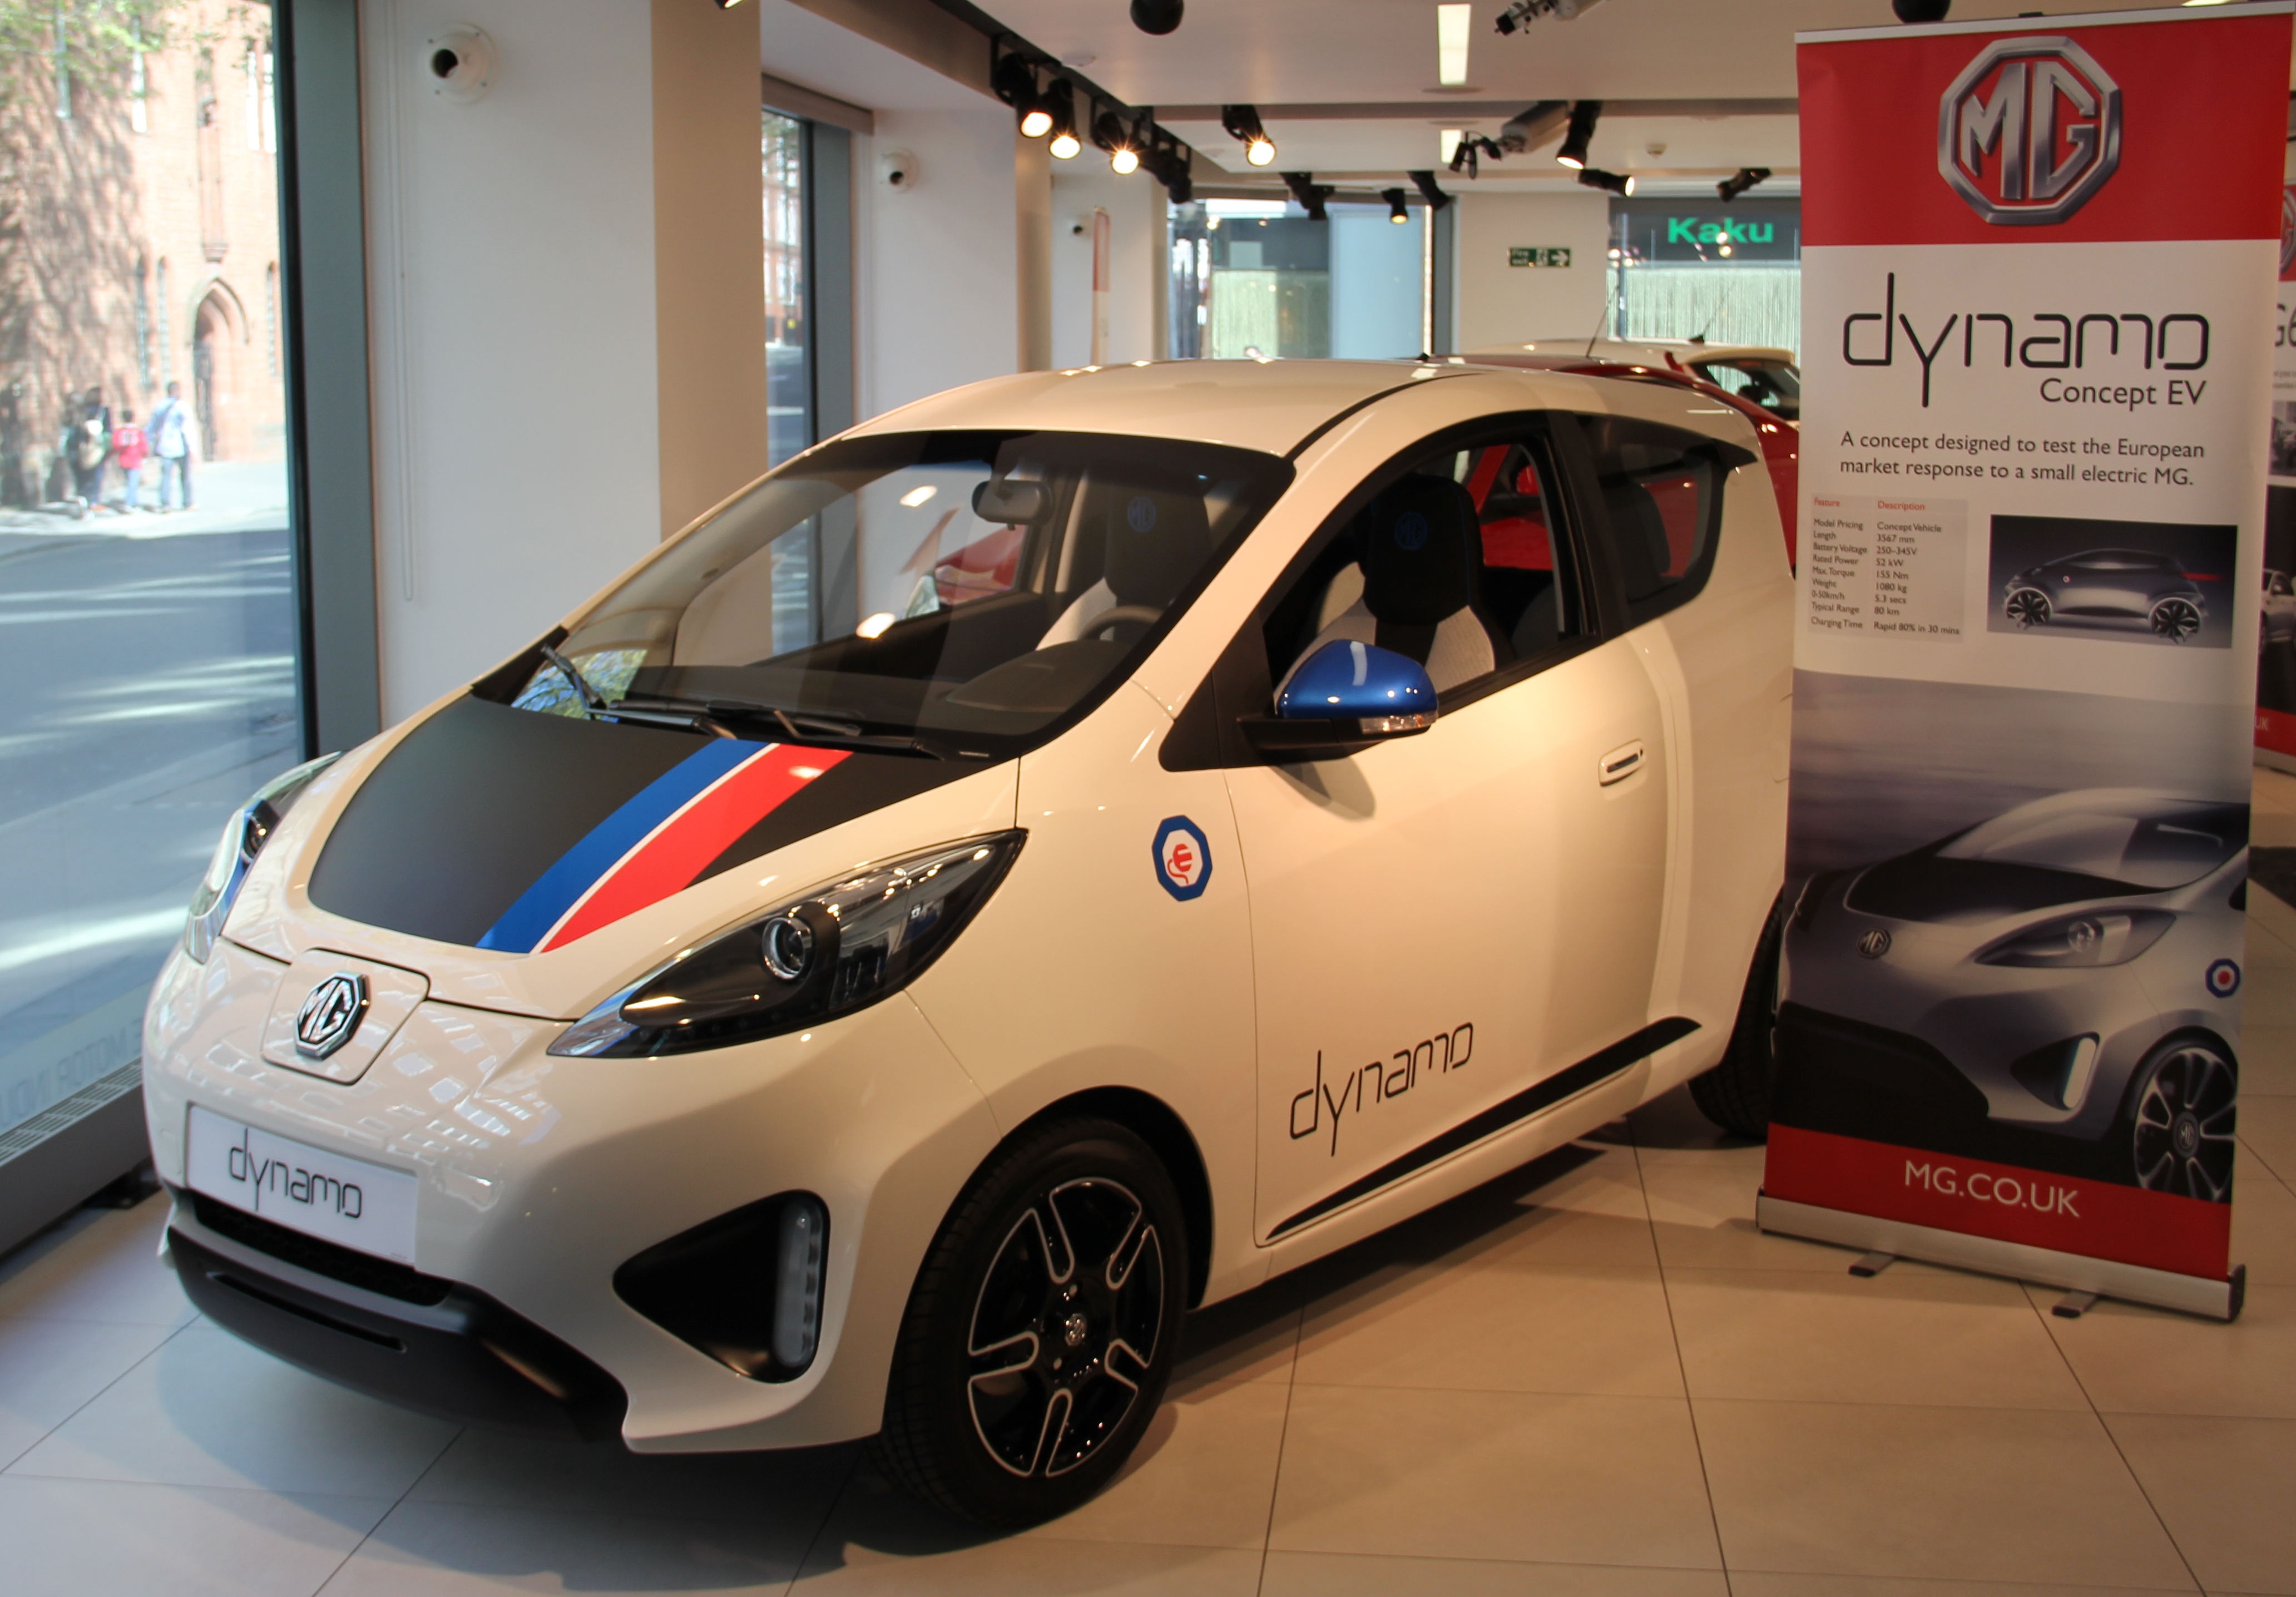 MG Dynamo concept electric vehicle